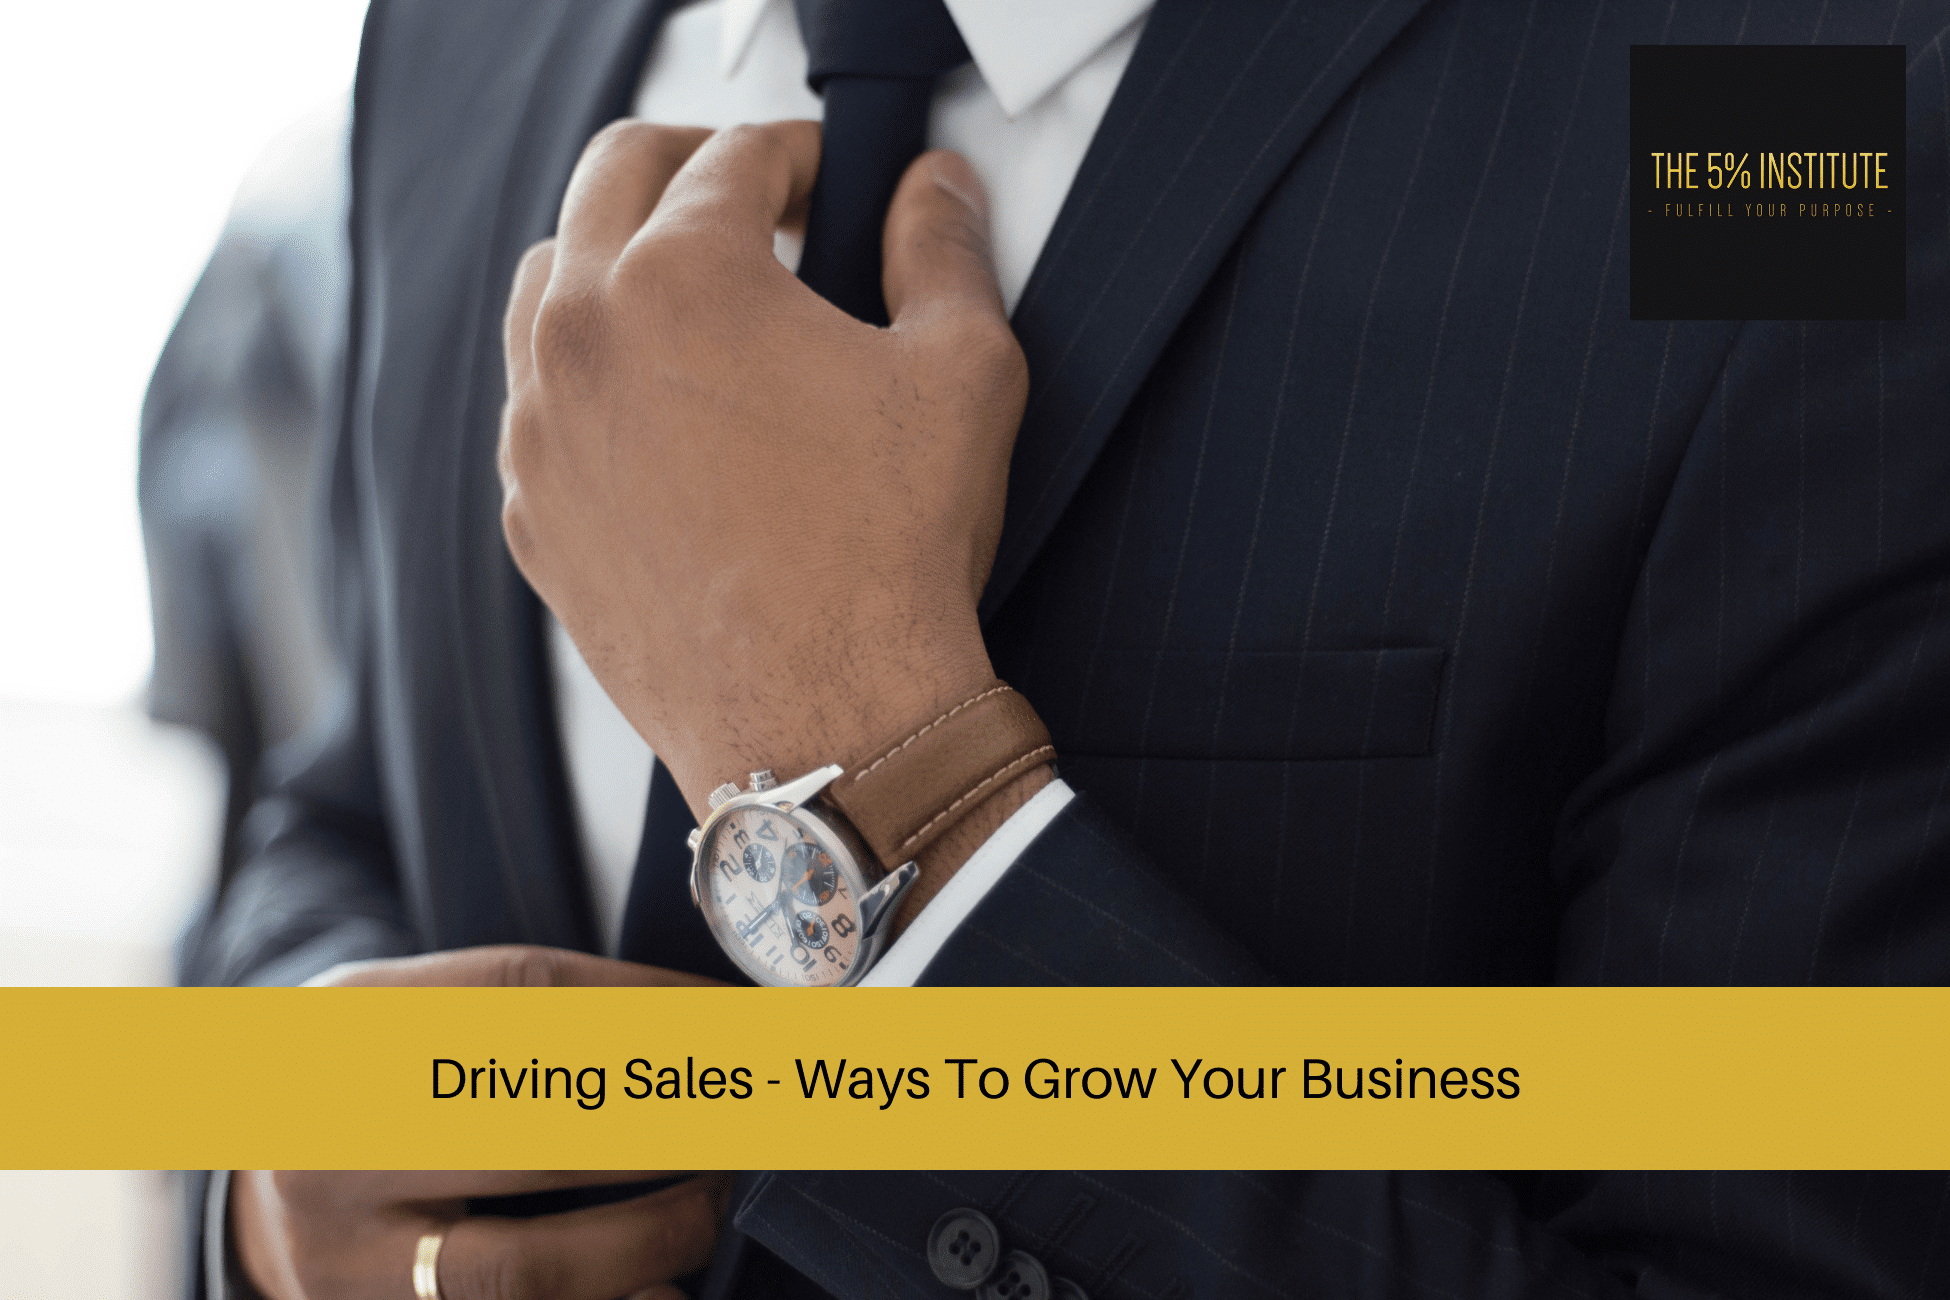 Driving Sales - Ways To Grow Your Business